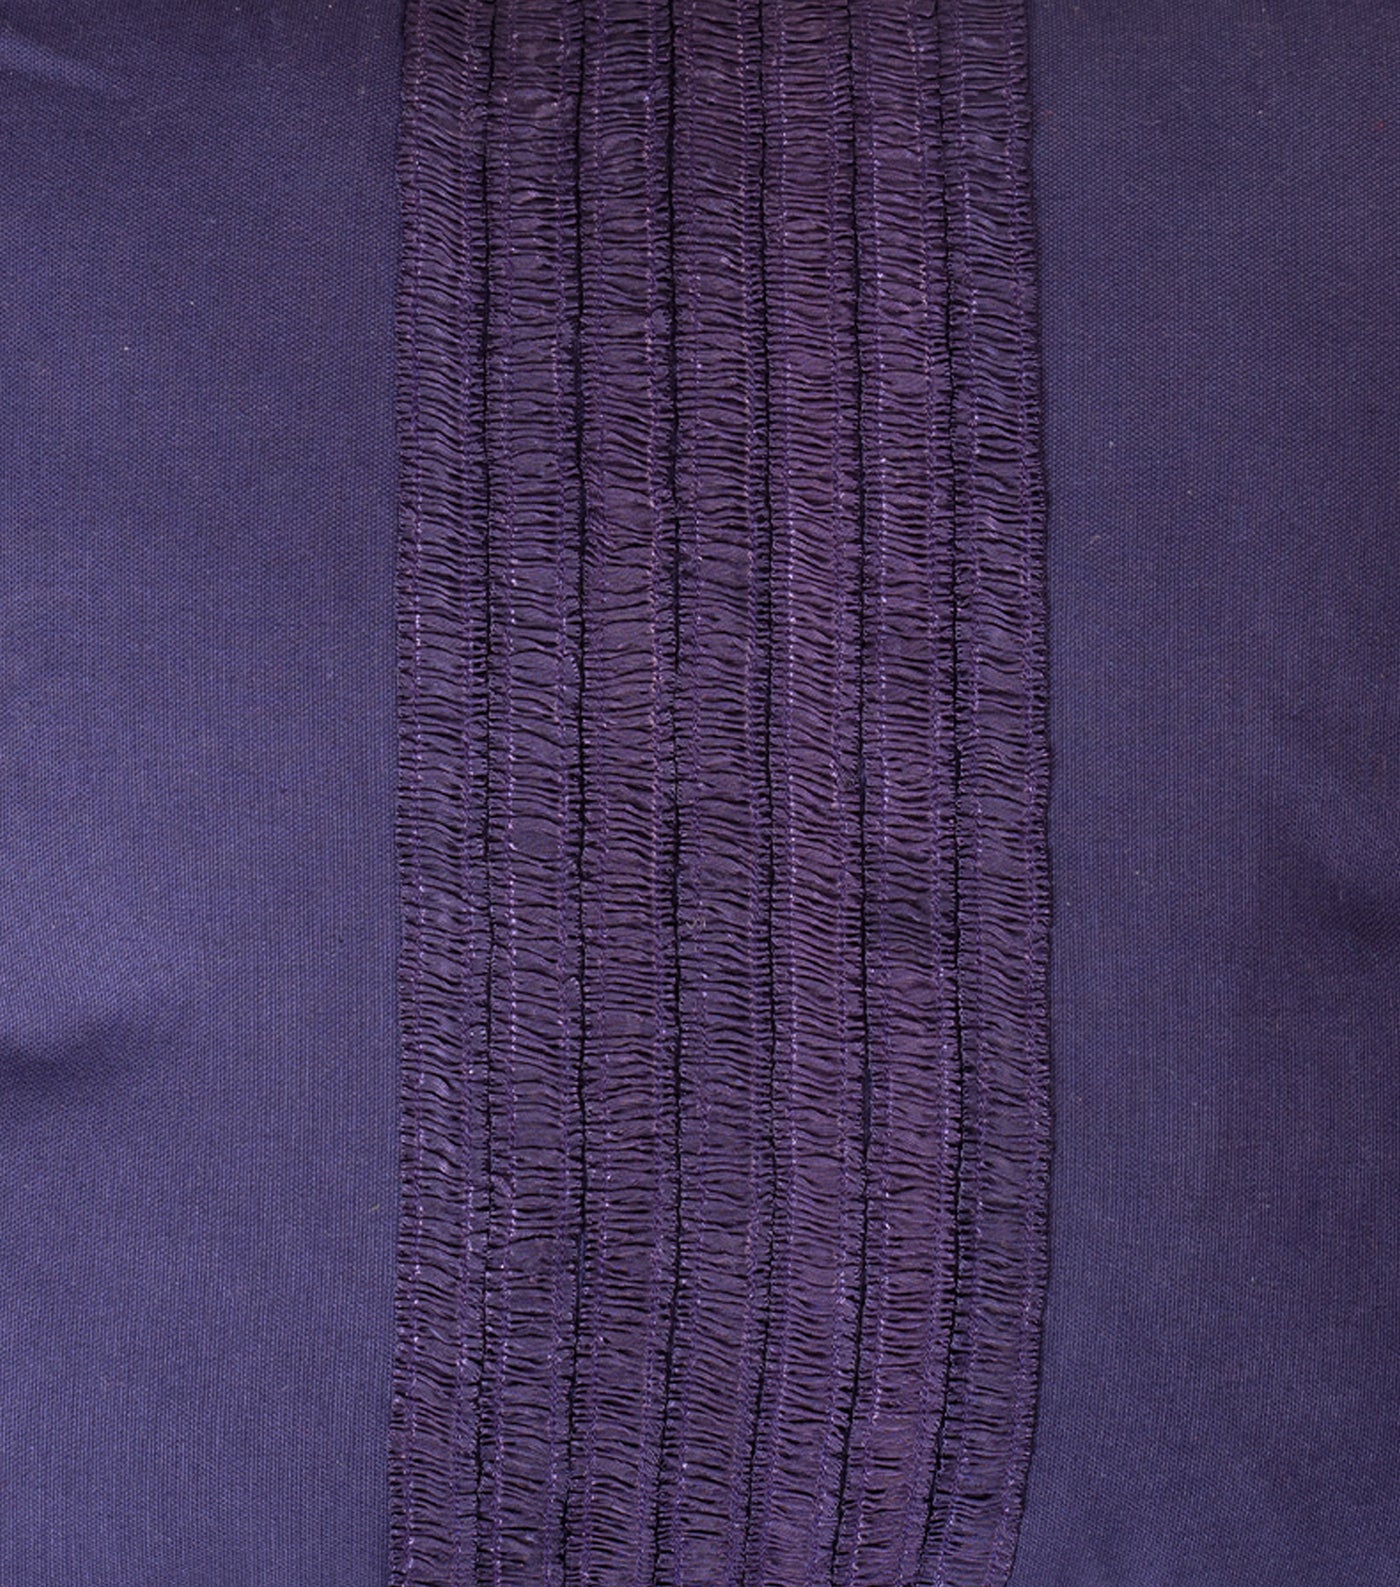 Purple Embroidered Cotton Cushion Cover